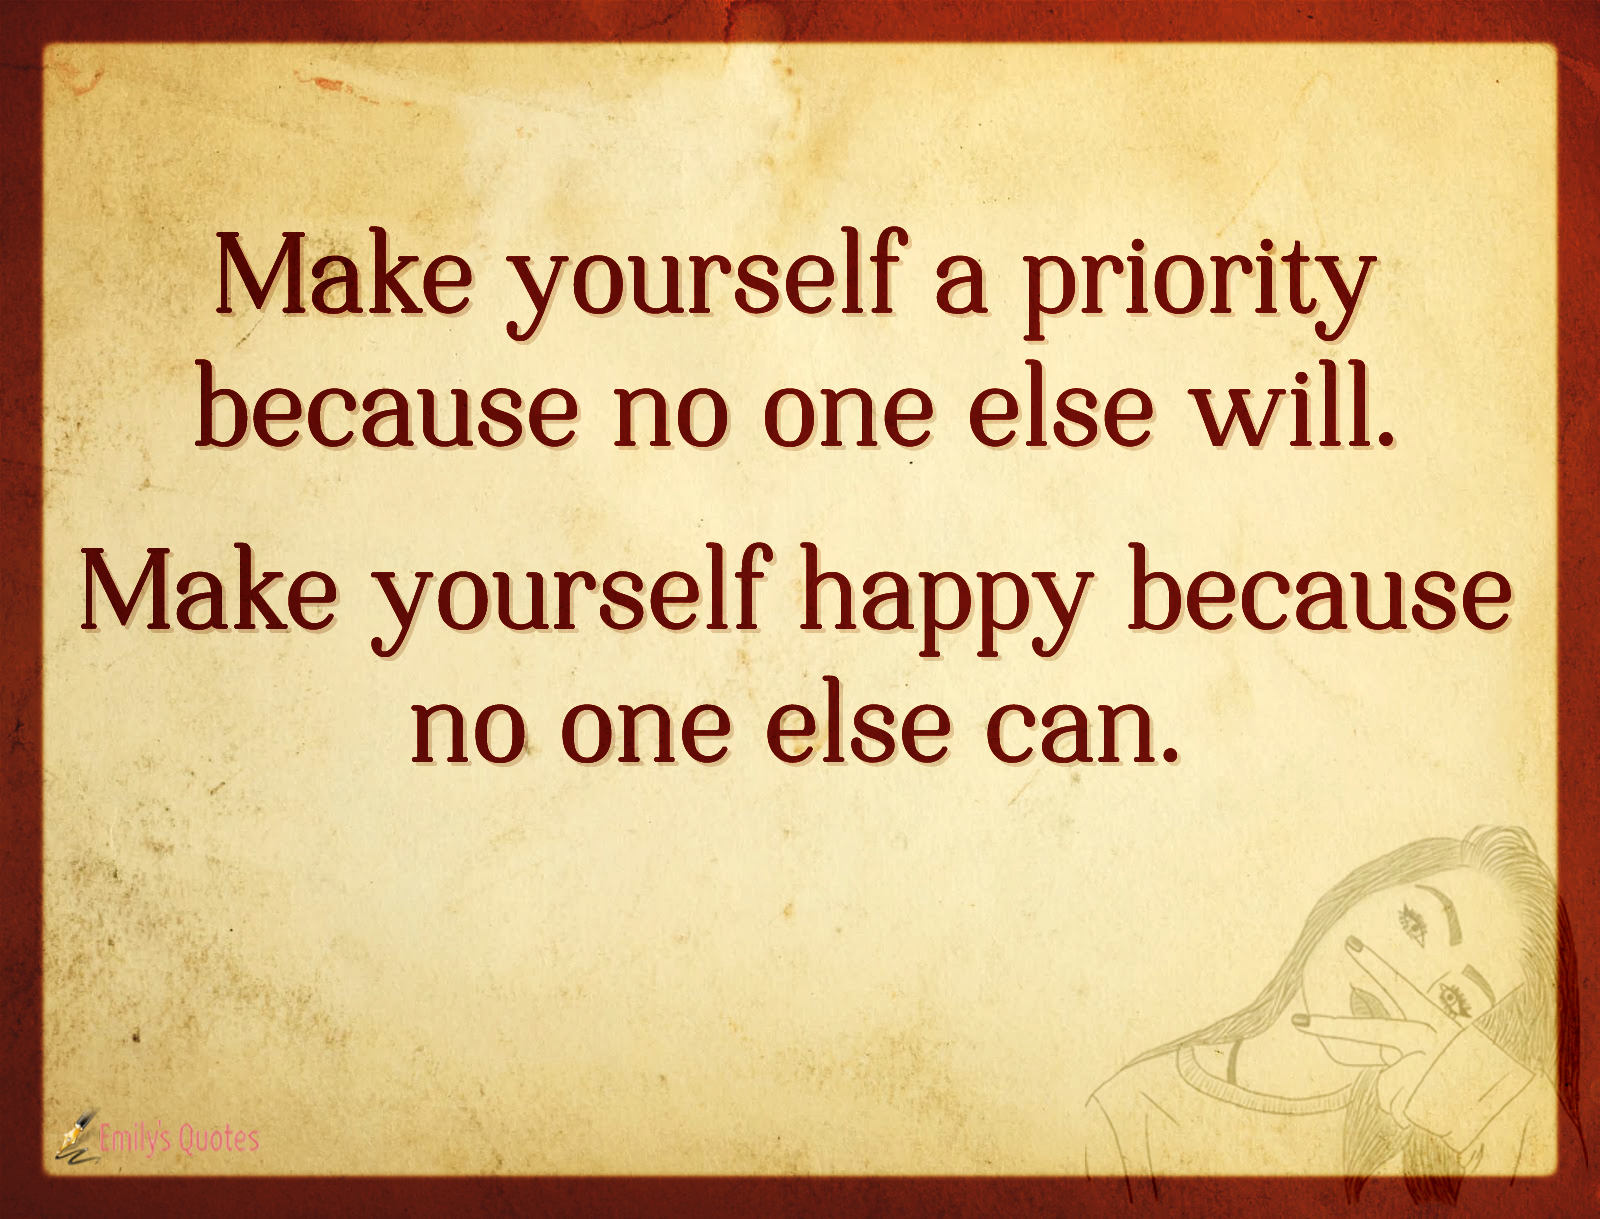 Make yourself a priority because no one else will. Make yourself